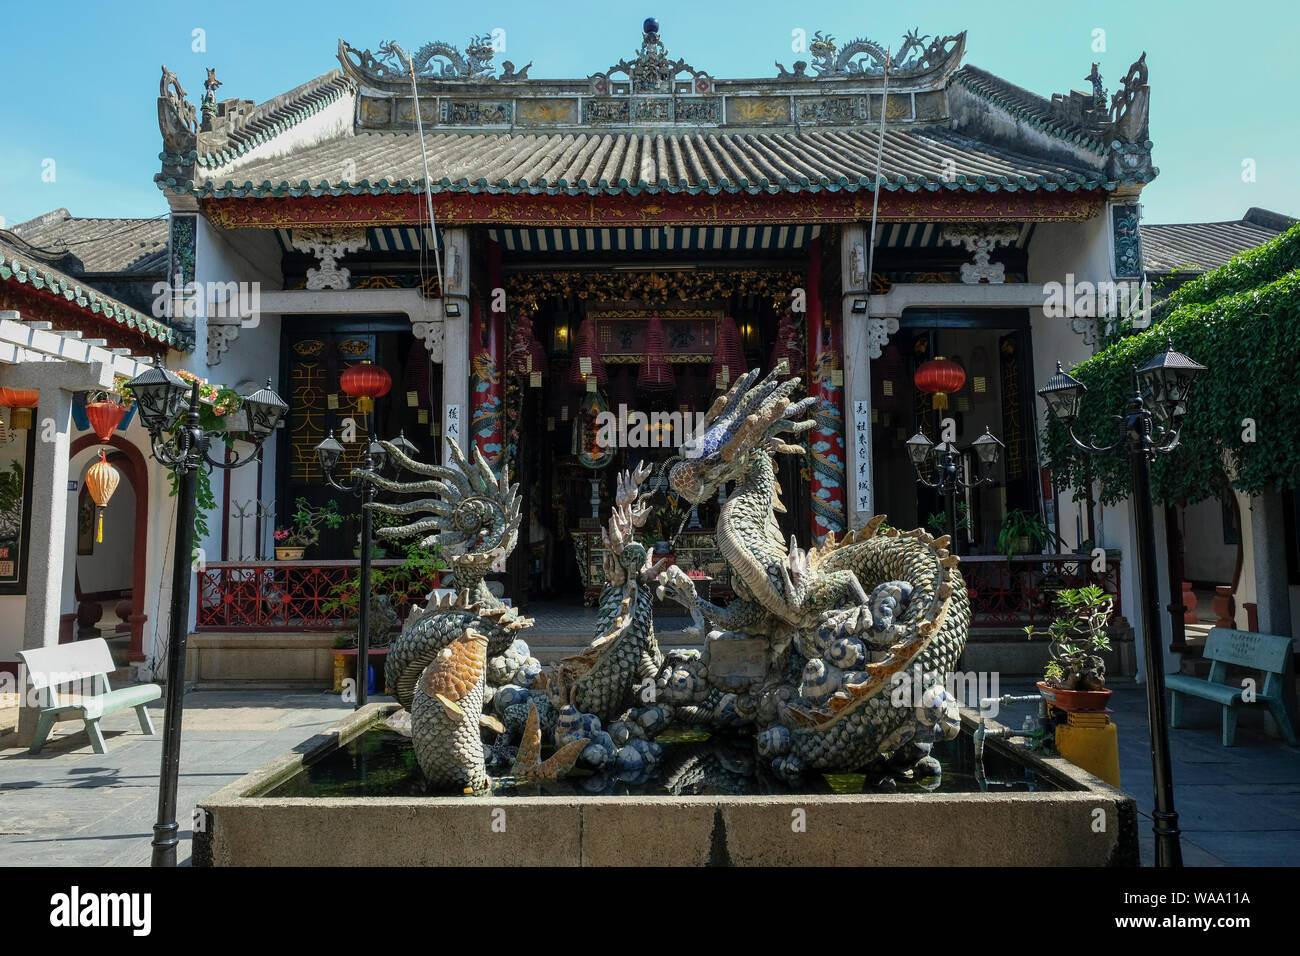 Hoi An, Vietnam - August 17: Dragon fountain at the Cantonese Assembly Hall (Quang Trieu) on August 17, 2018 in Hoi An, Vietnam. Stock Photo